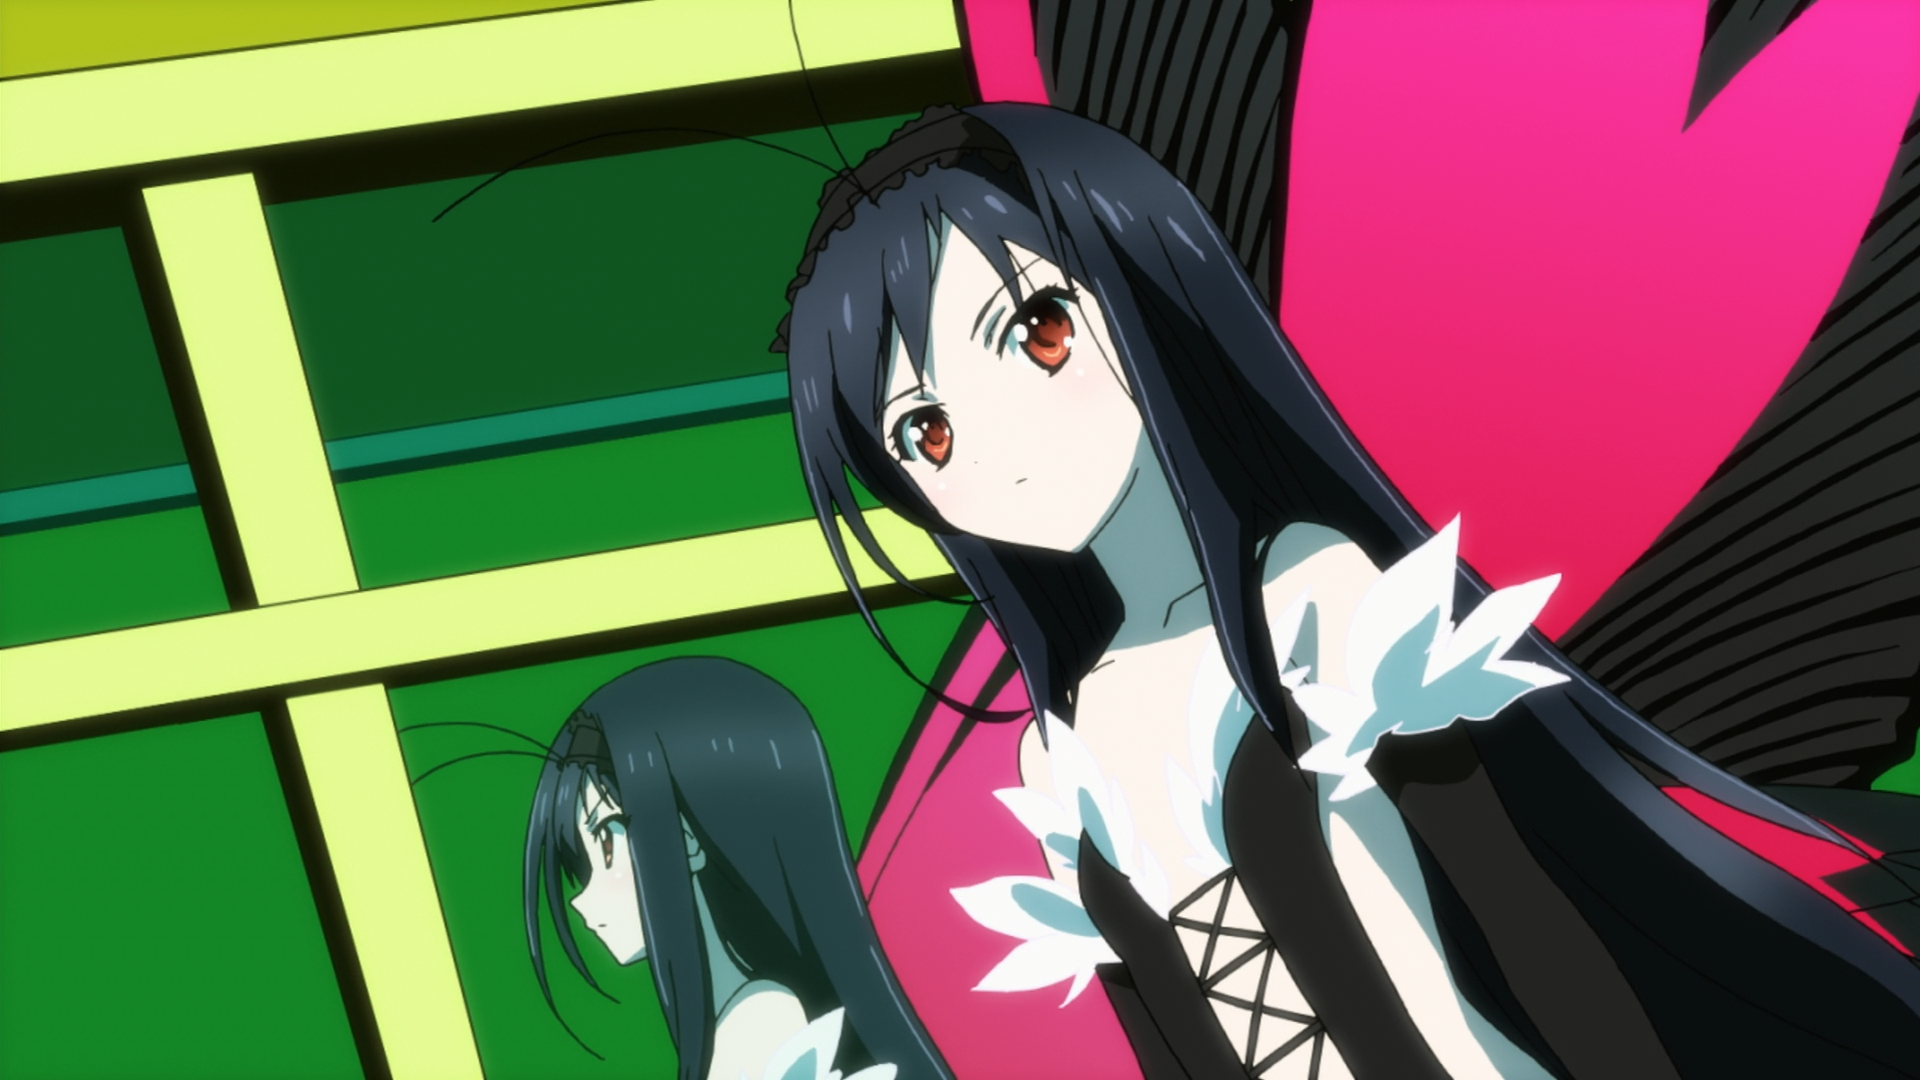 120 Accel World HD Wallpapers and Backgrounds